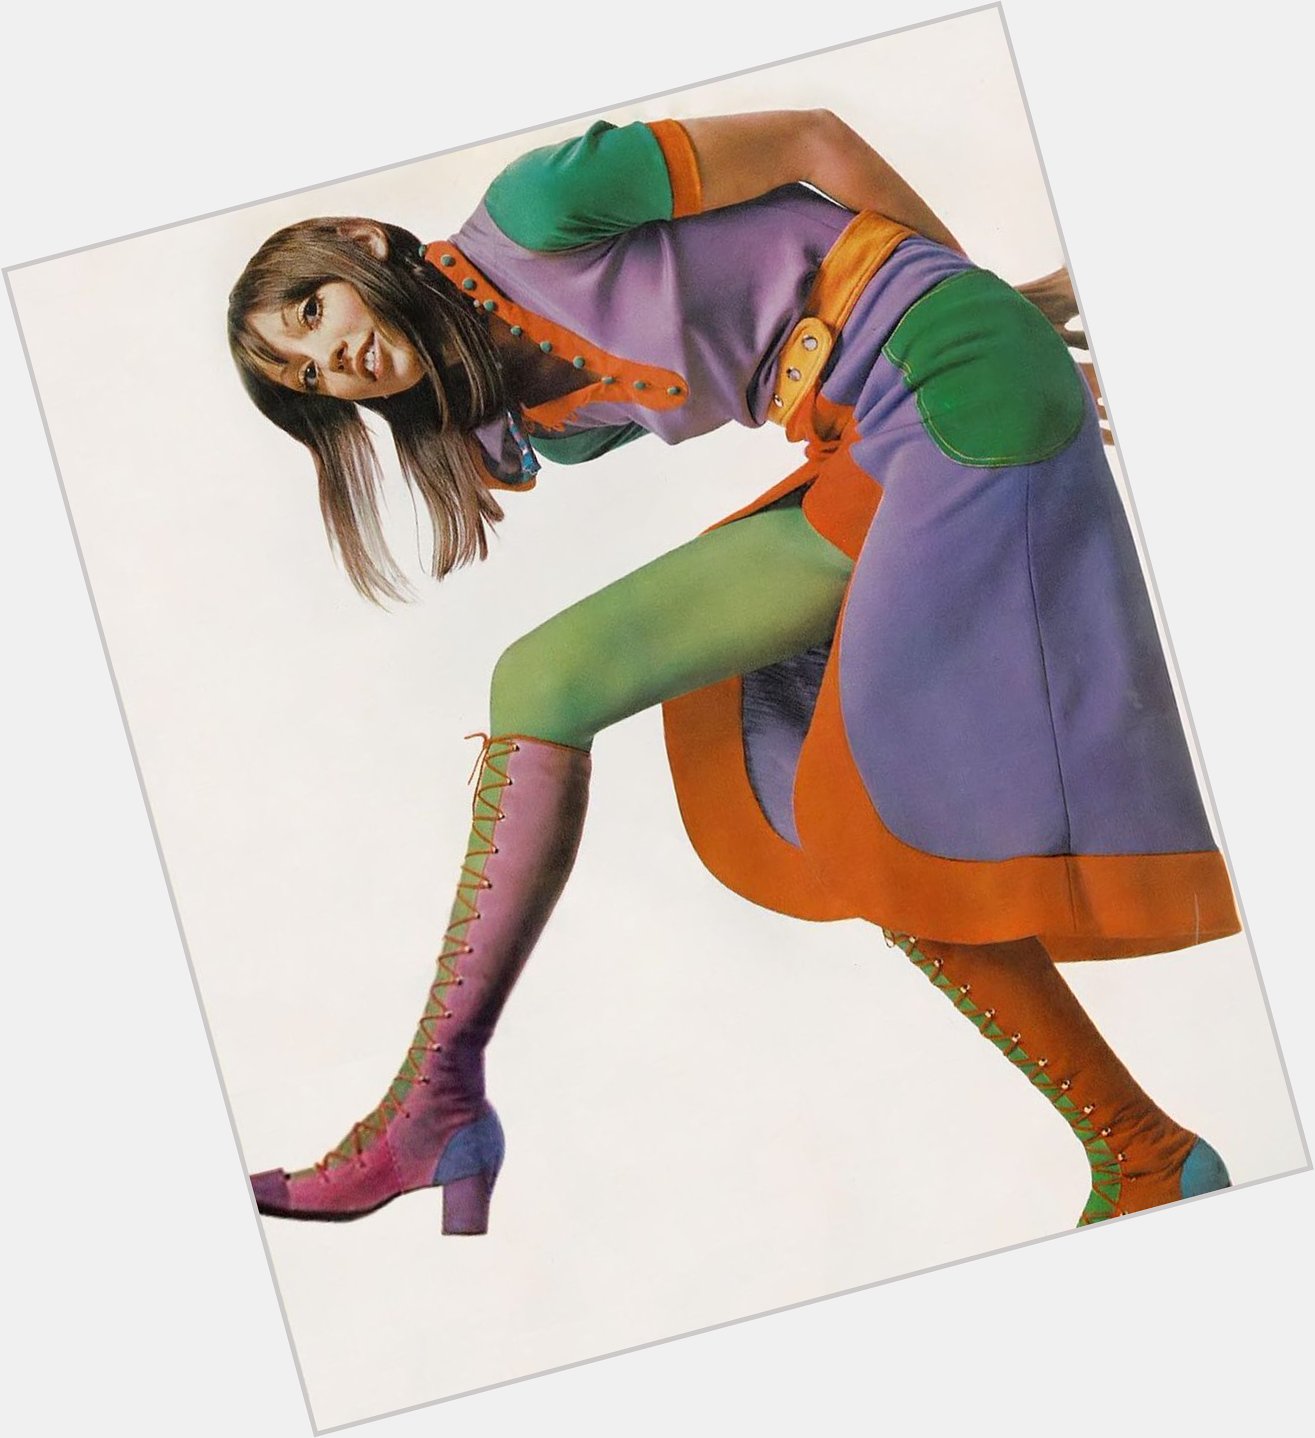 Happy Birthday Shelley Duvall Photography by Bert Stern for Vogue, 1971 